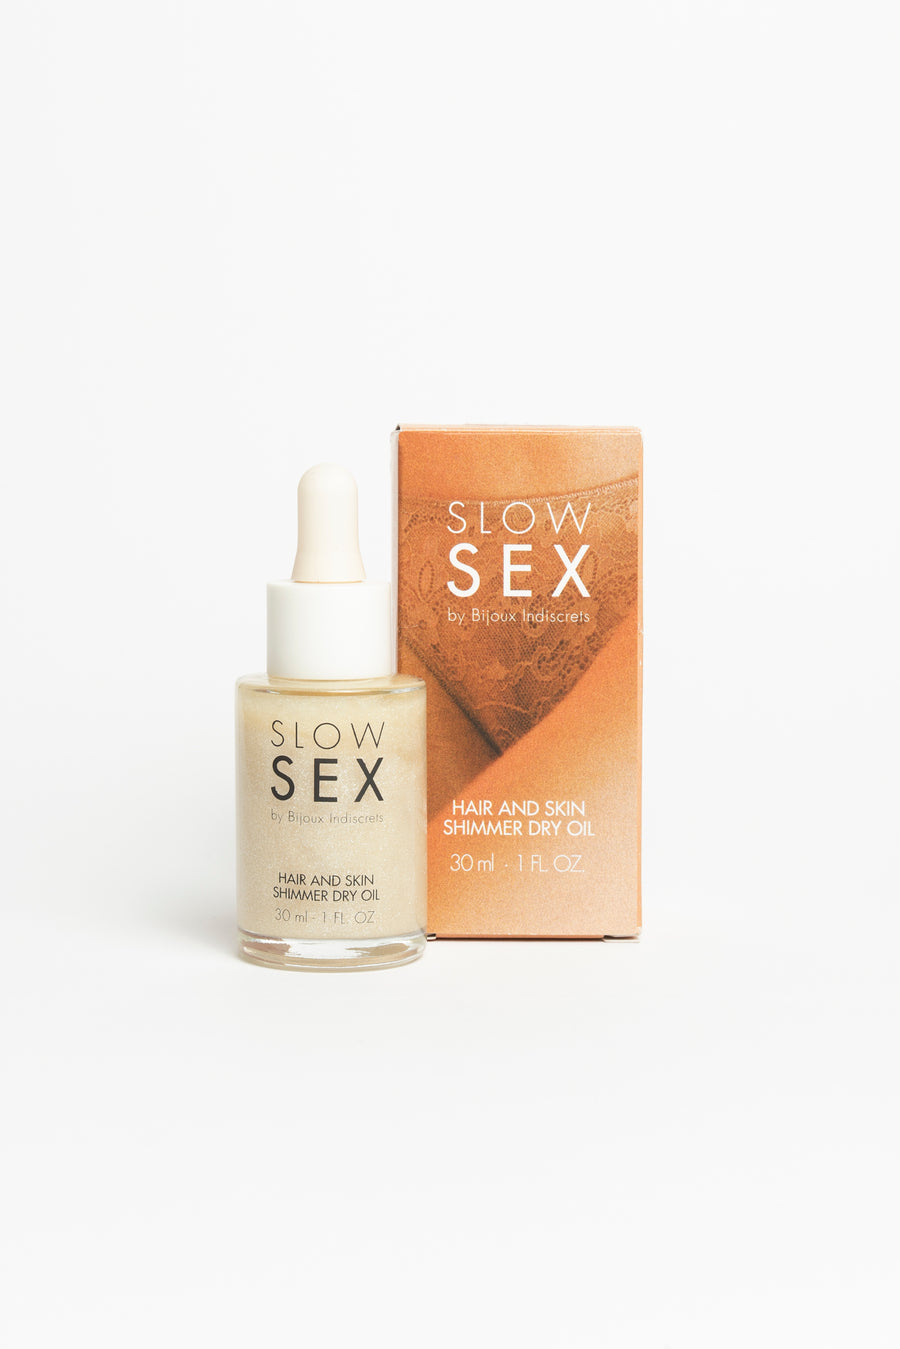 BIJOUX INDISCRETS SLOW SEX HAIR AND SKIN SHIMMER DRY OIL